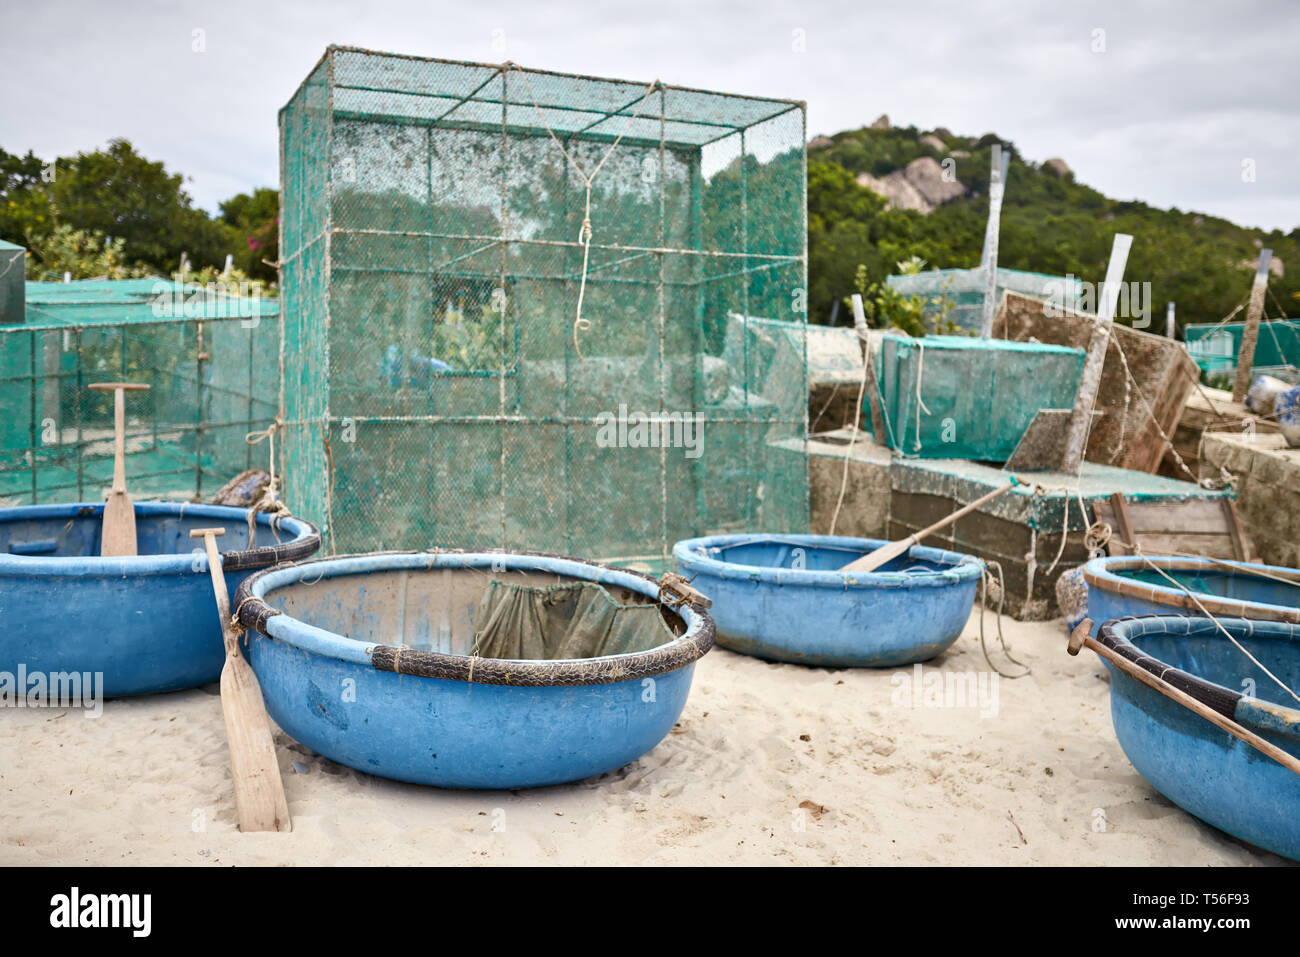 Lobster netting cages on sand beach in Vietnam Stock Photo - Alamy